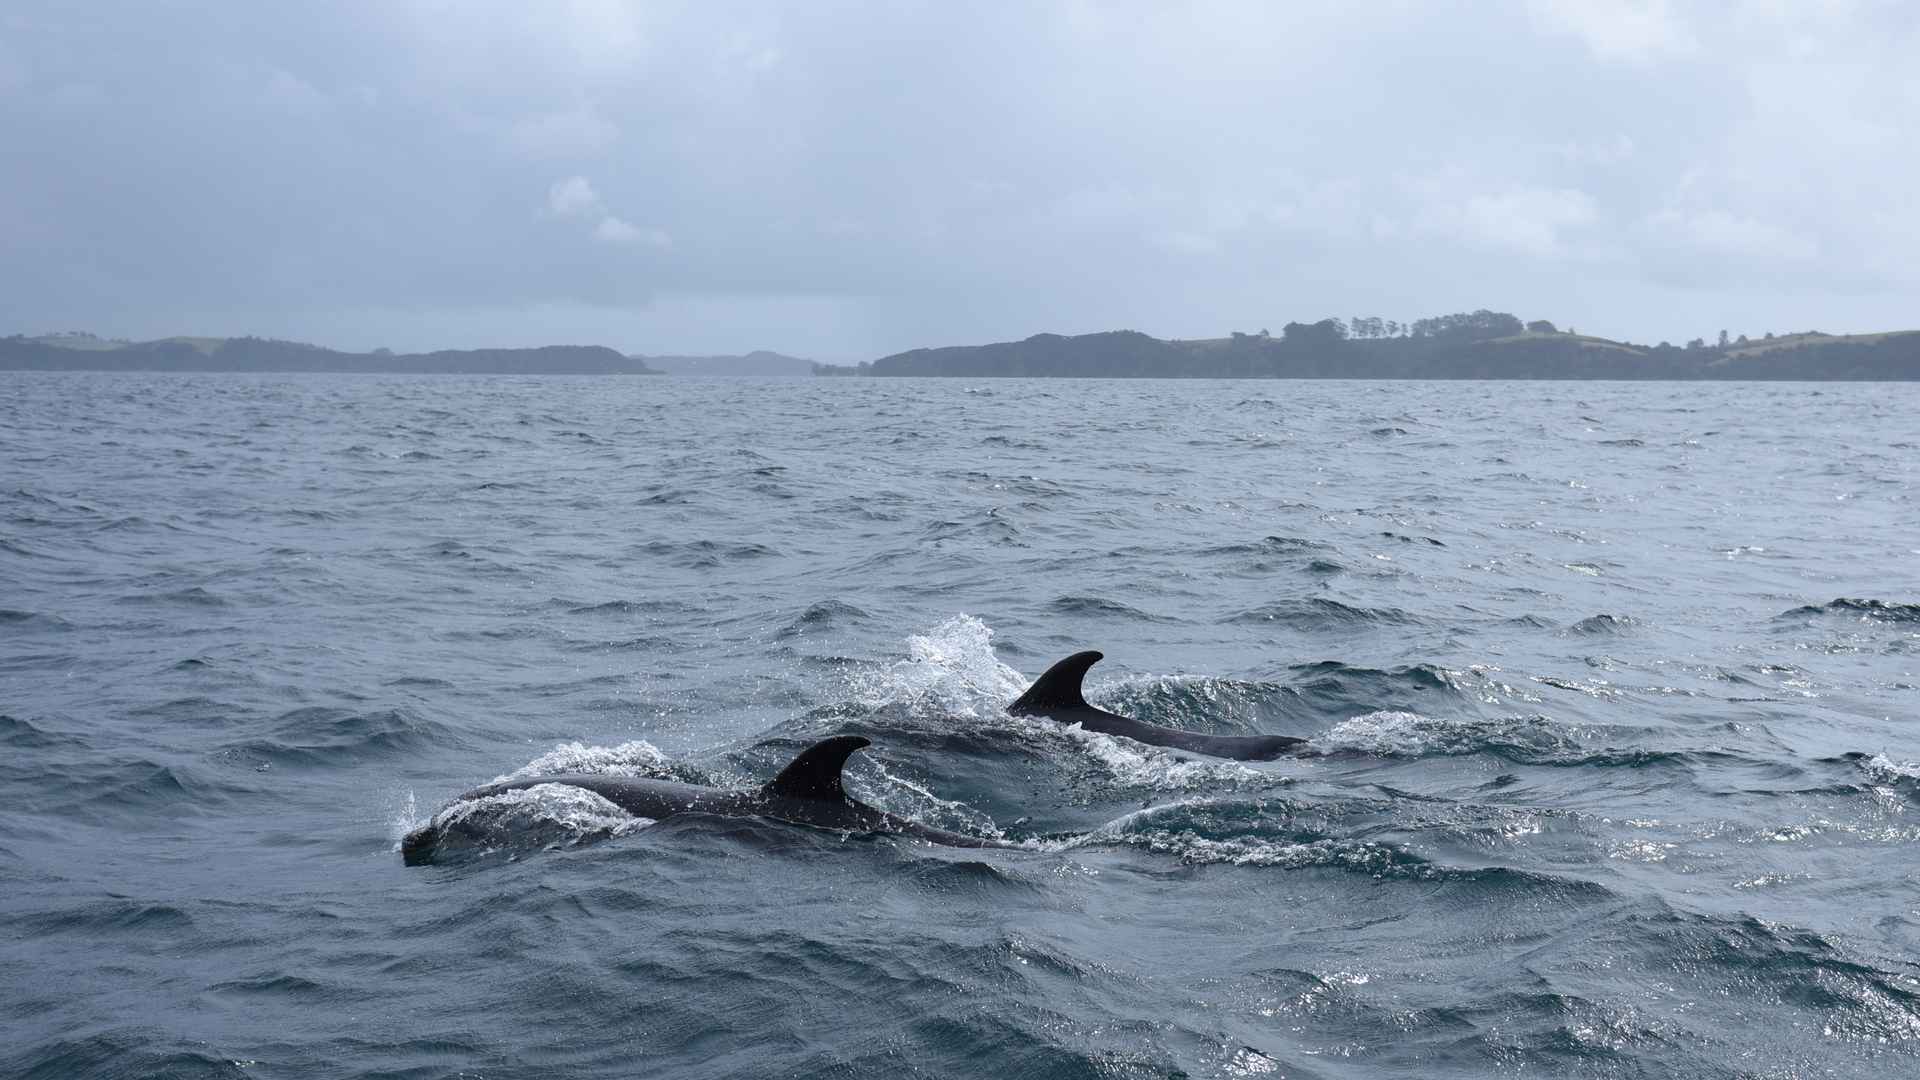 Dolphins swimming near The Rock NZ